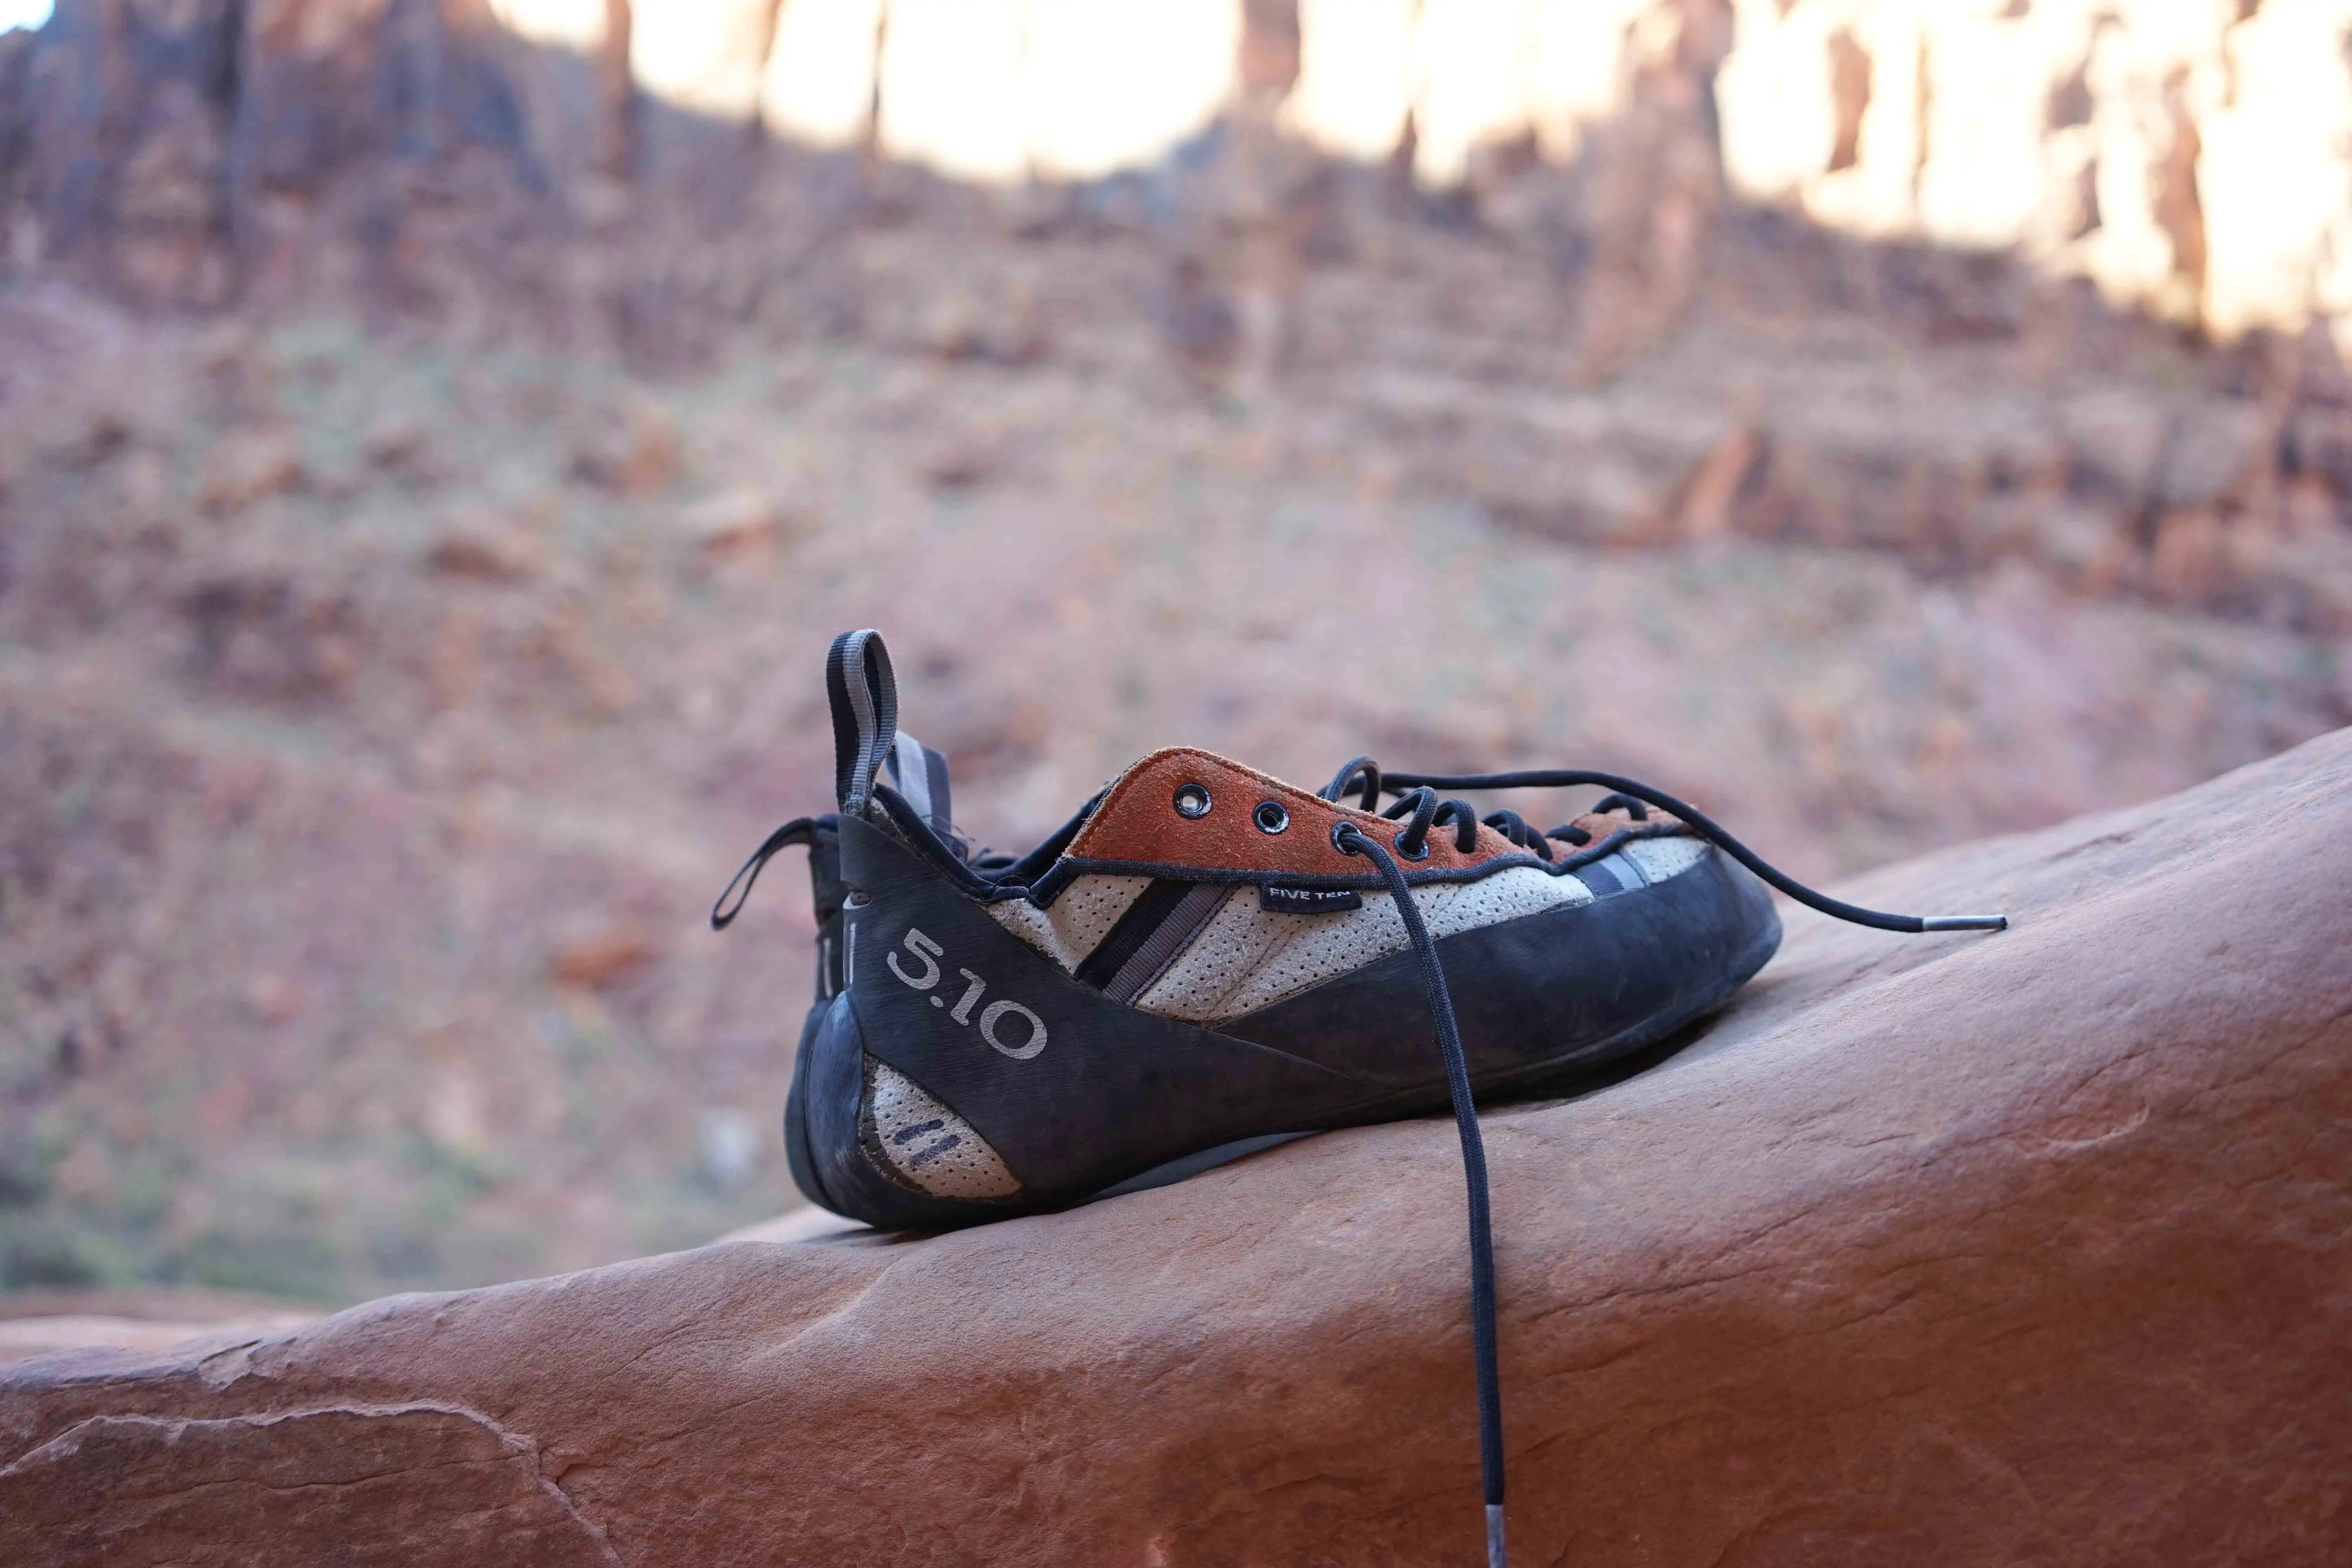 How to Shrink Climbing Shoes - Expert 